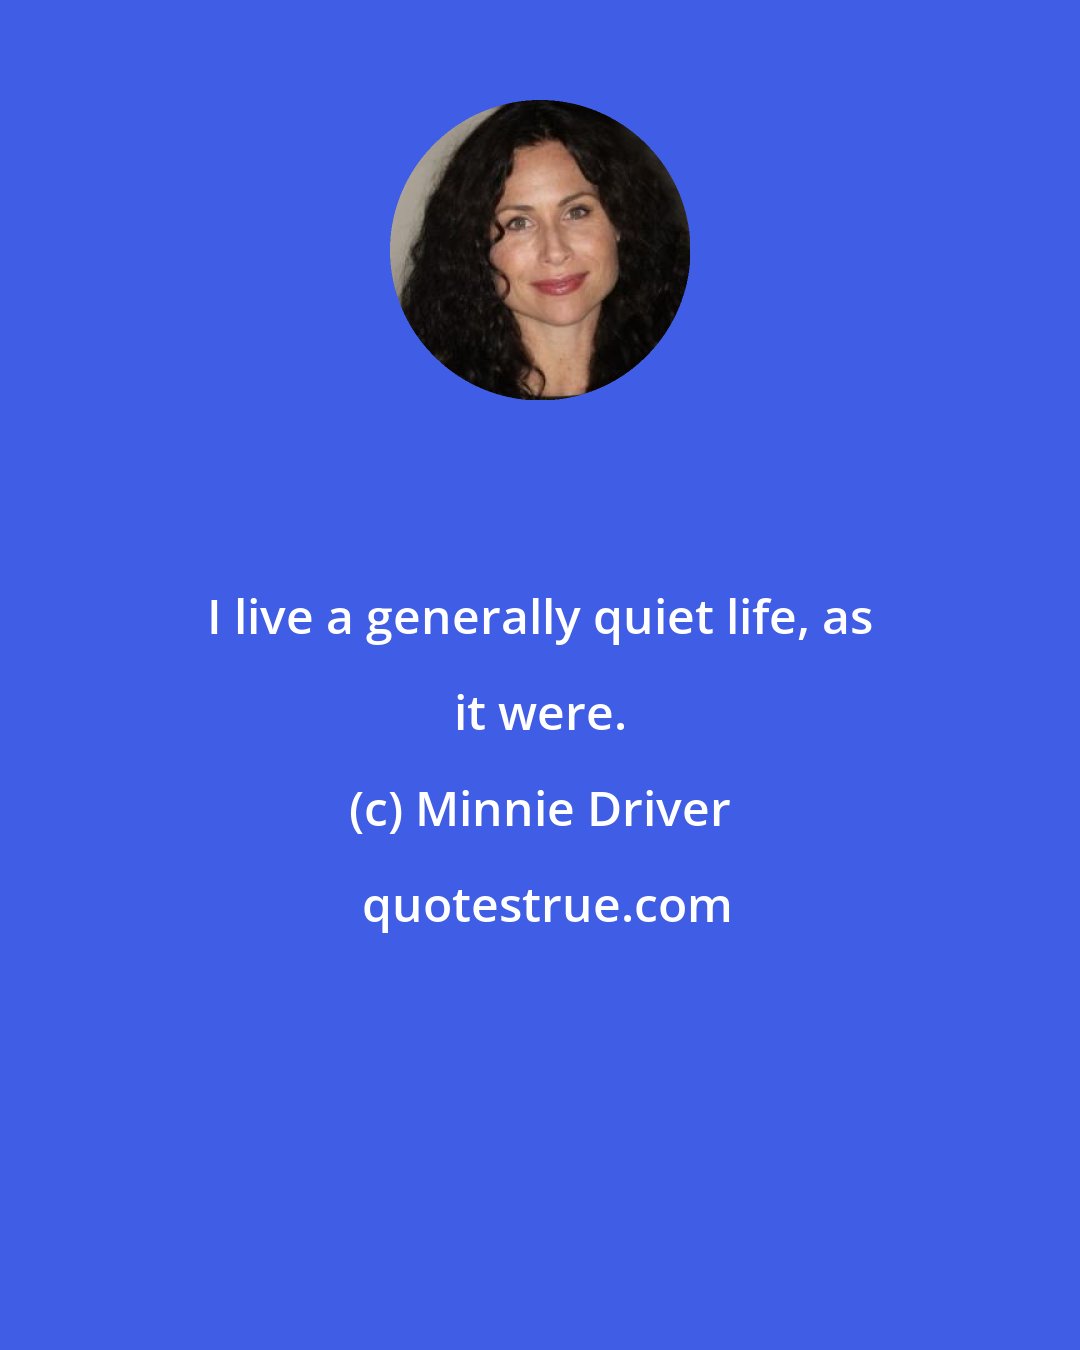 Minnie Driver: I live a generally quiet life, as it were.